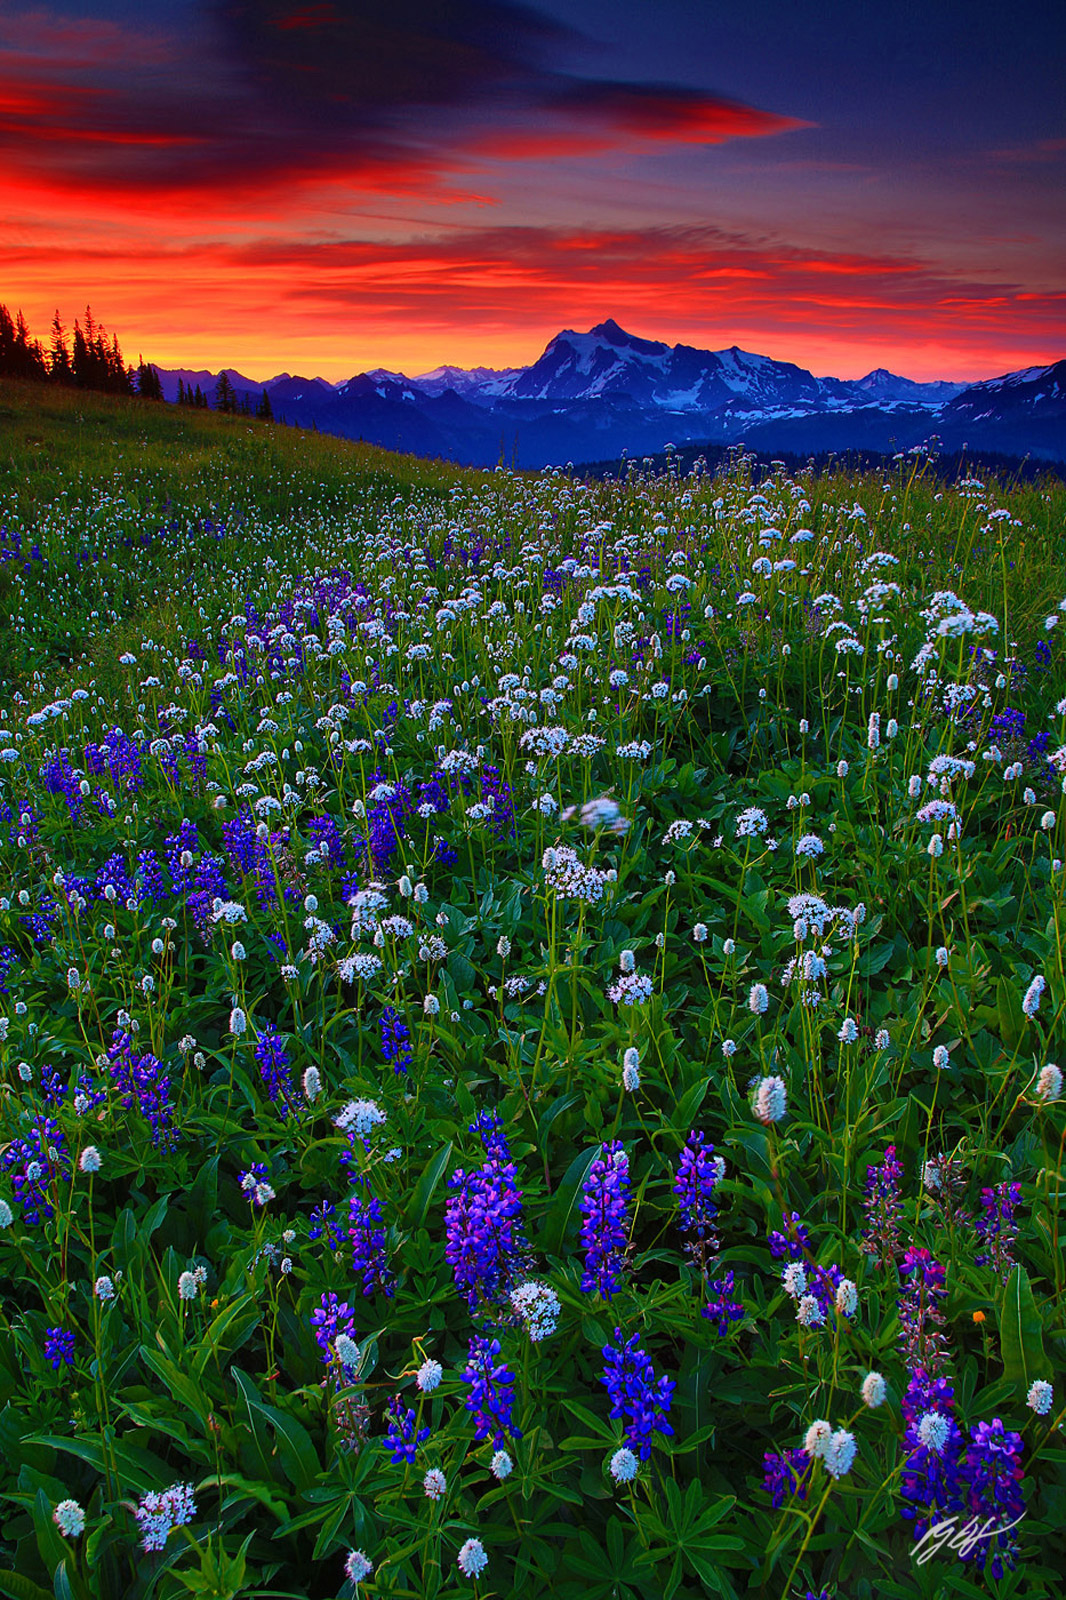 Sunrise Wildflowers and Mt Shuksan from Skyline Divide in the Mt Baker Wilderness in Washington